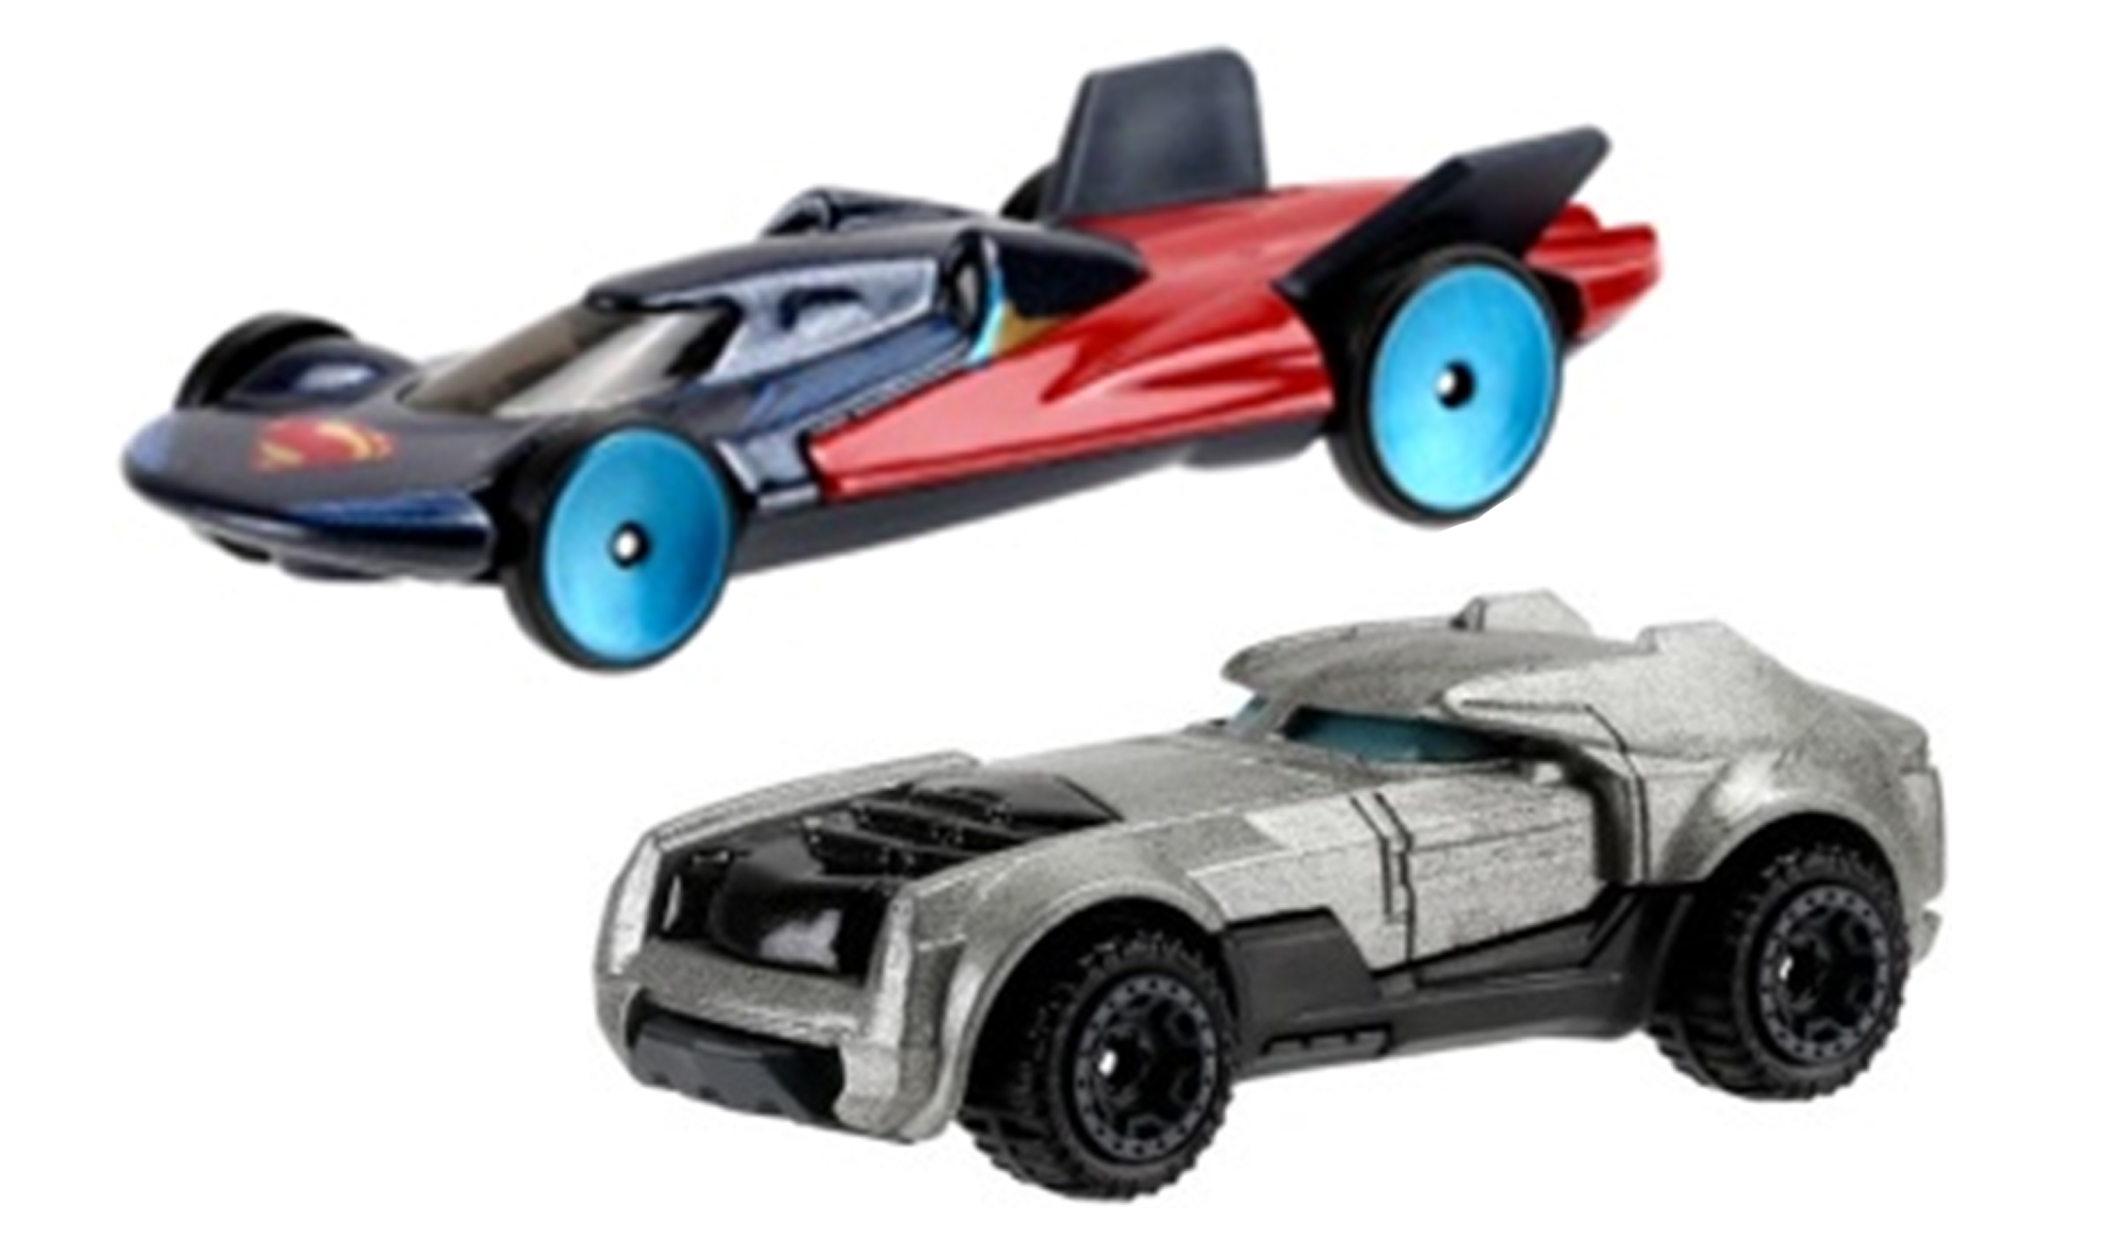 Hot Wheels Batman v Superman: Ever wondered how super heroes would look like in car form? Our three heroes will be featured transformed as a Hot Wheel. SRP $3.99 each